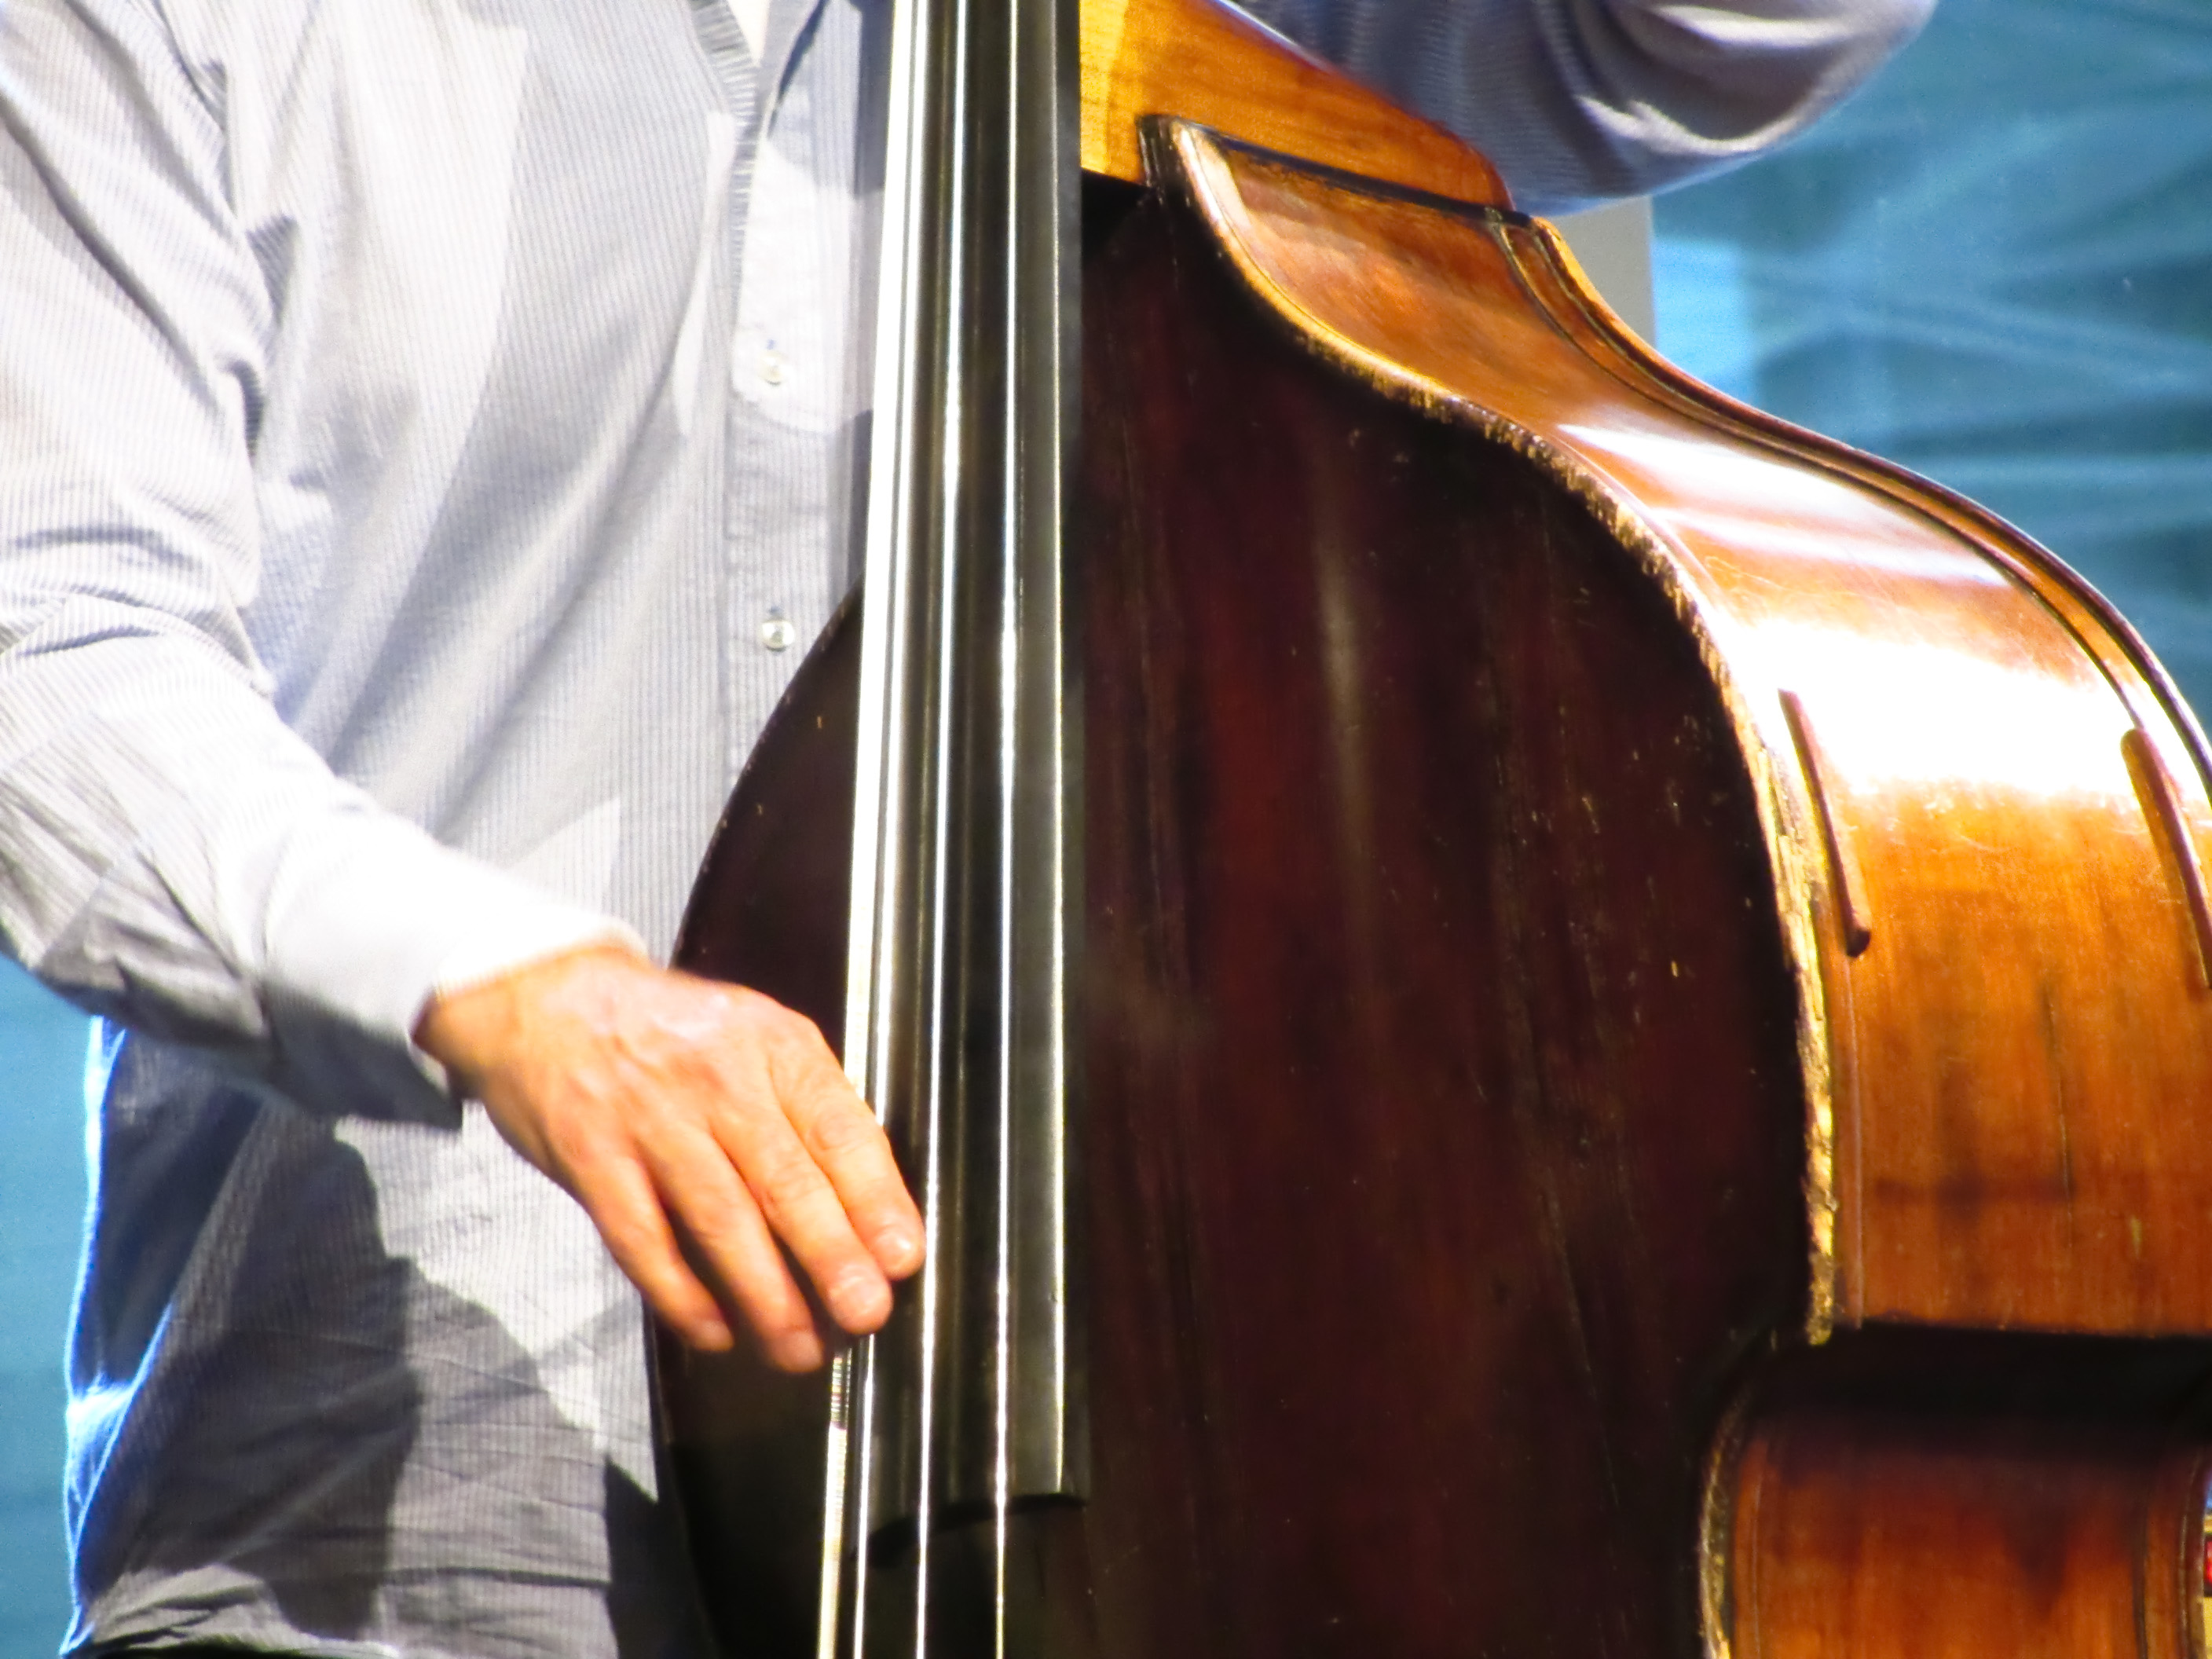 Double Bass (photo by Garry Knight)